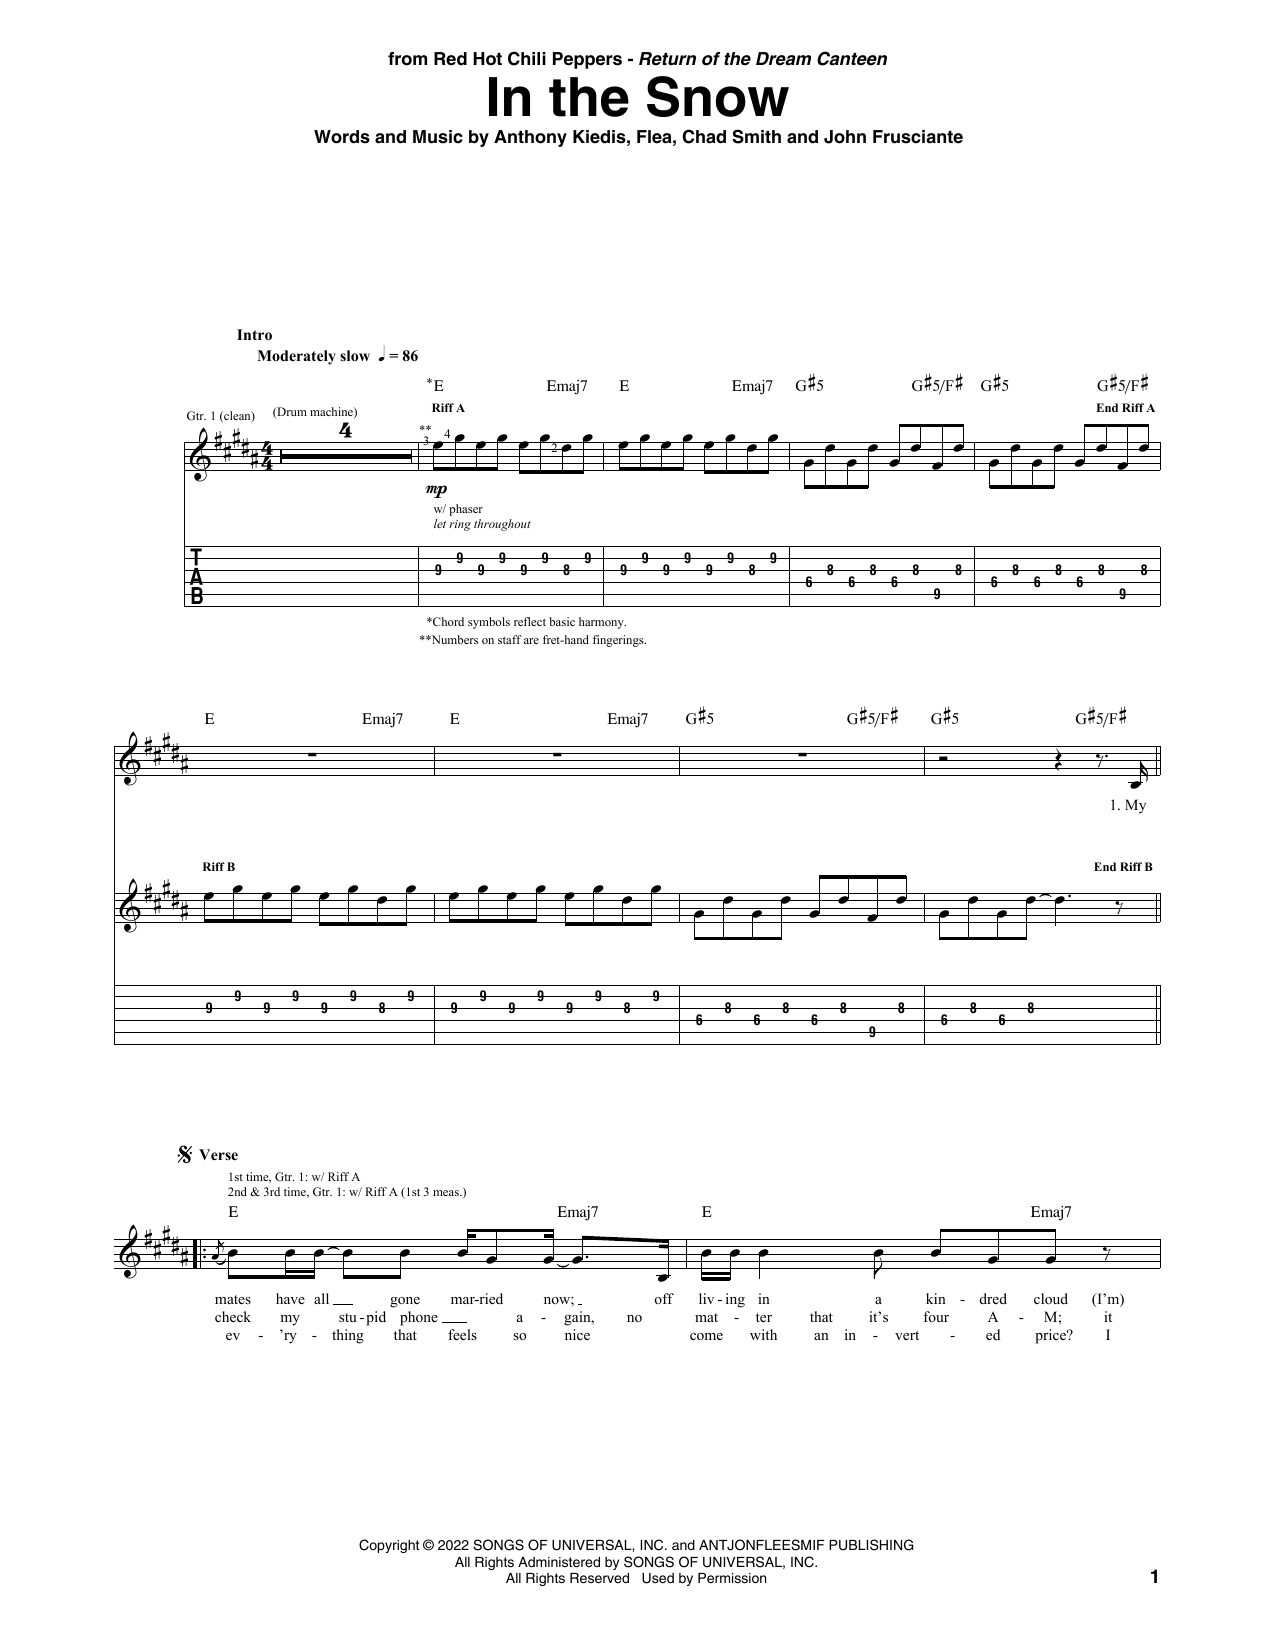 Download Red Hot Chili Peppers In The Snow Sheet Music